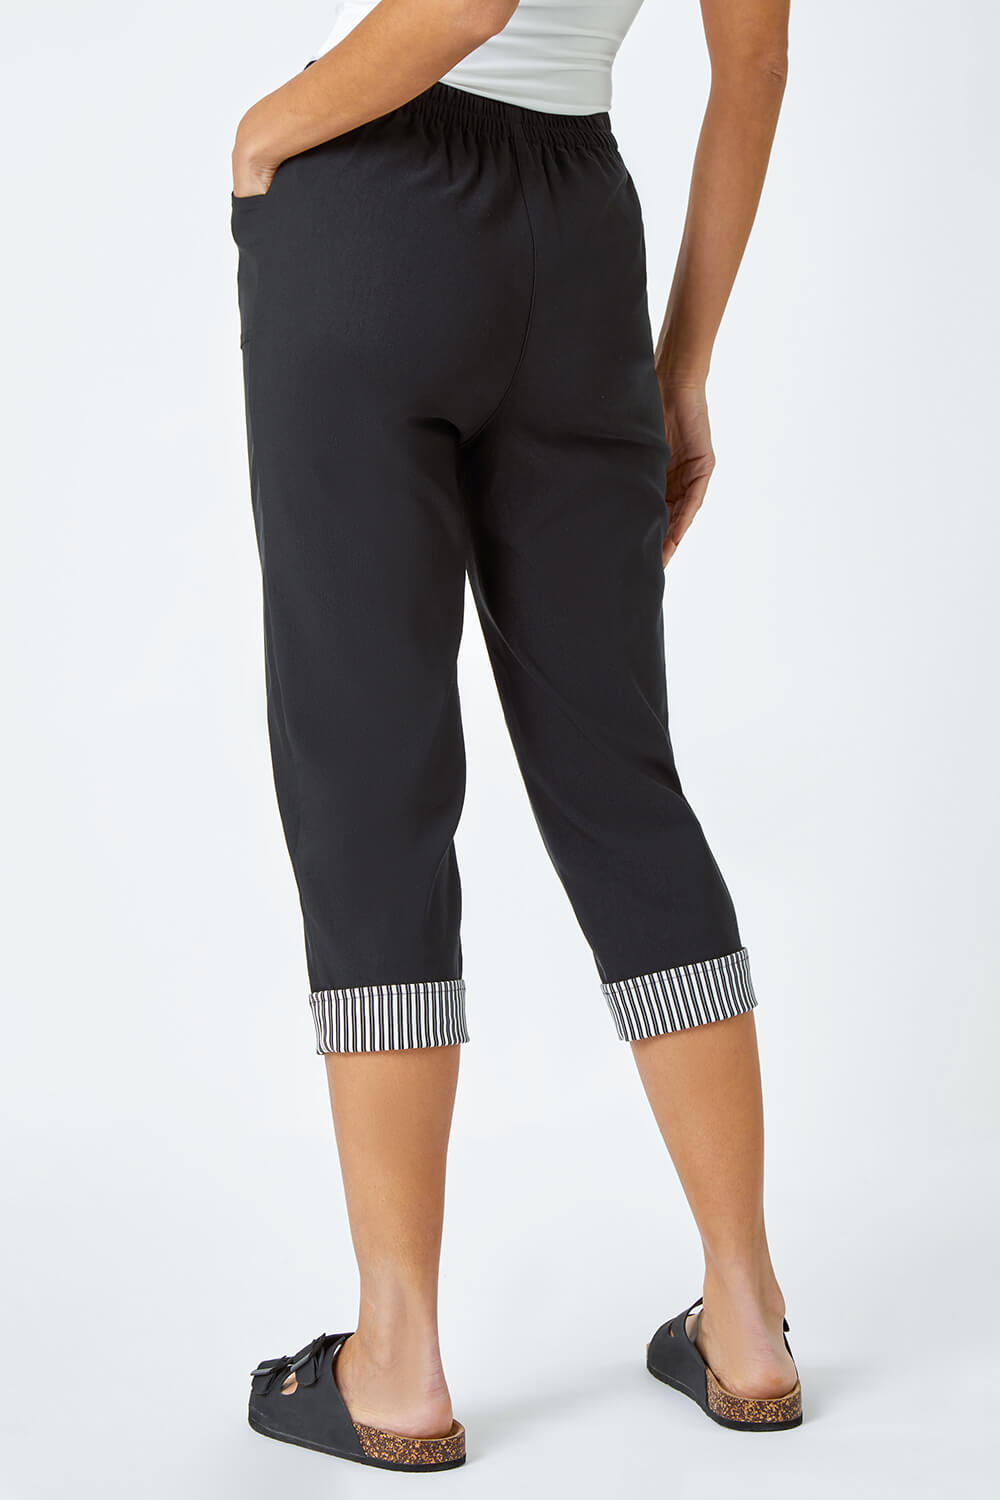 Black Contrast Detail Cropped Stretch Trousers, Image 4 of 5